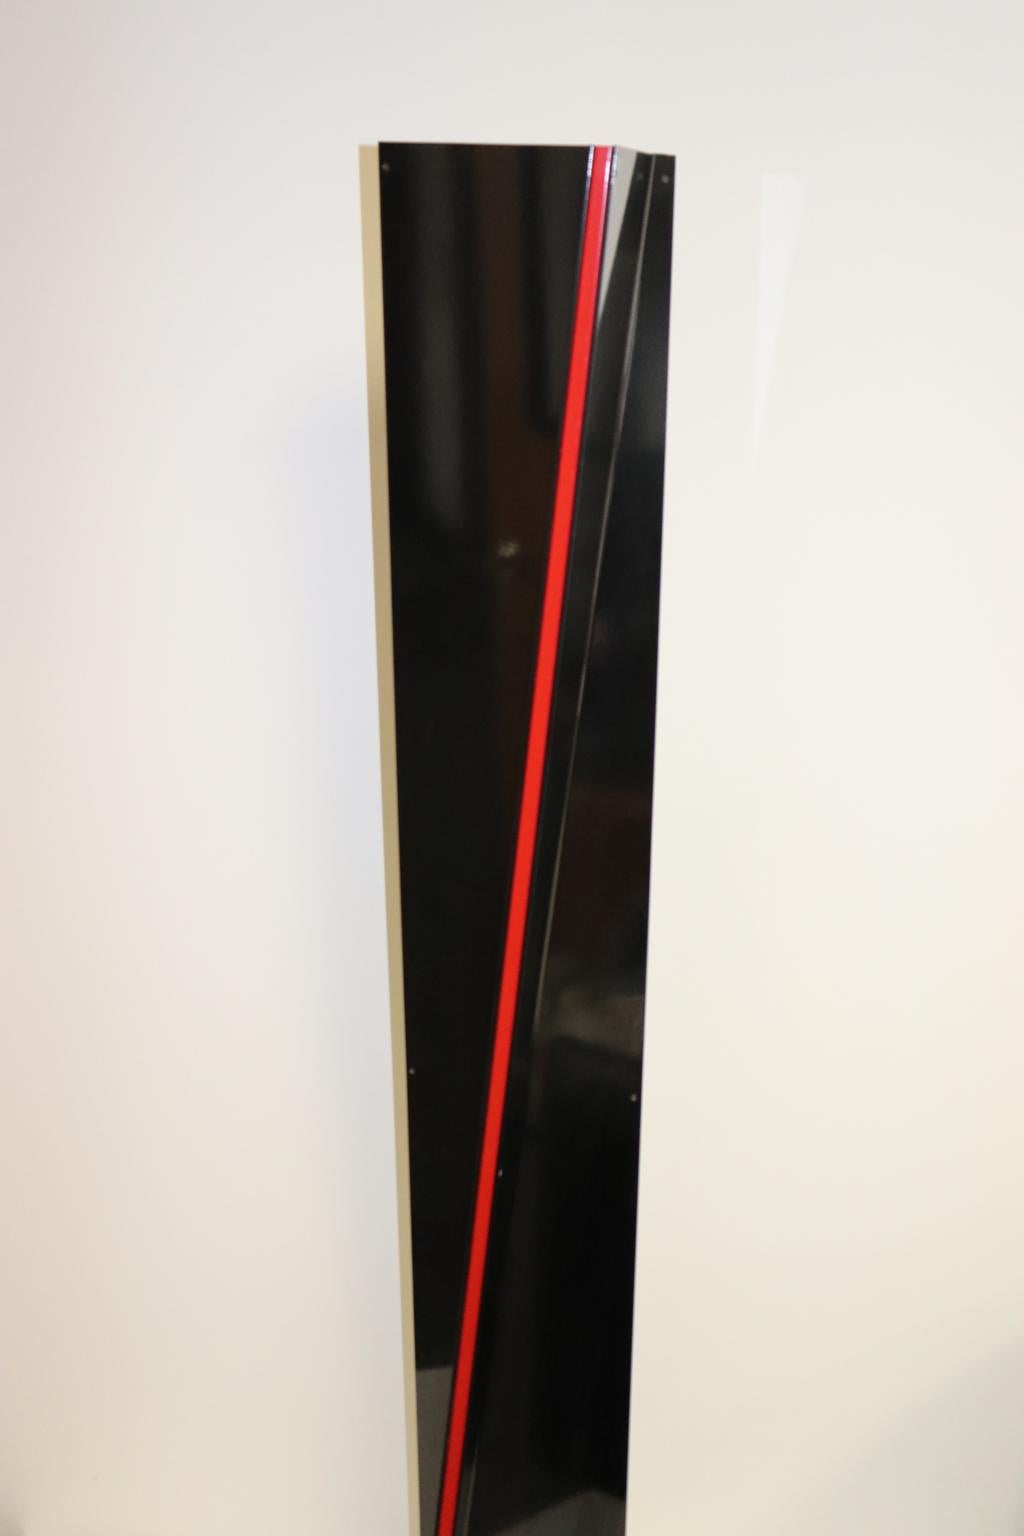 Mauro Marzollo Sculptured Floor Lamp Black with Red Stripes Details For Sale 1